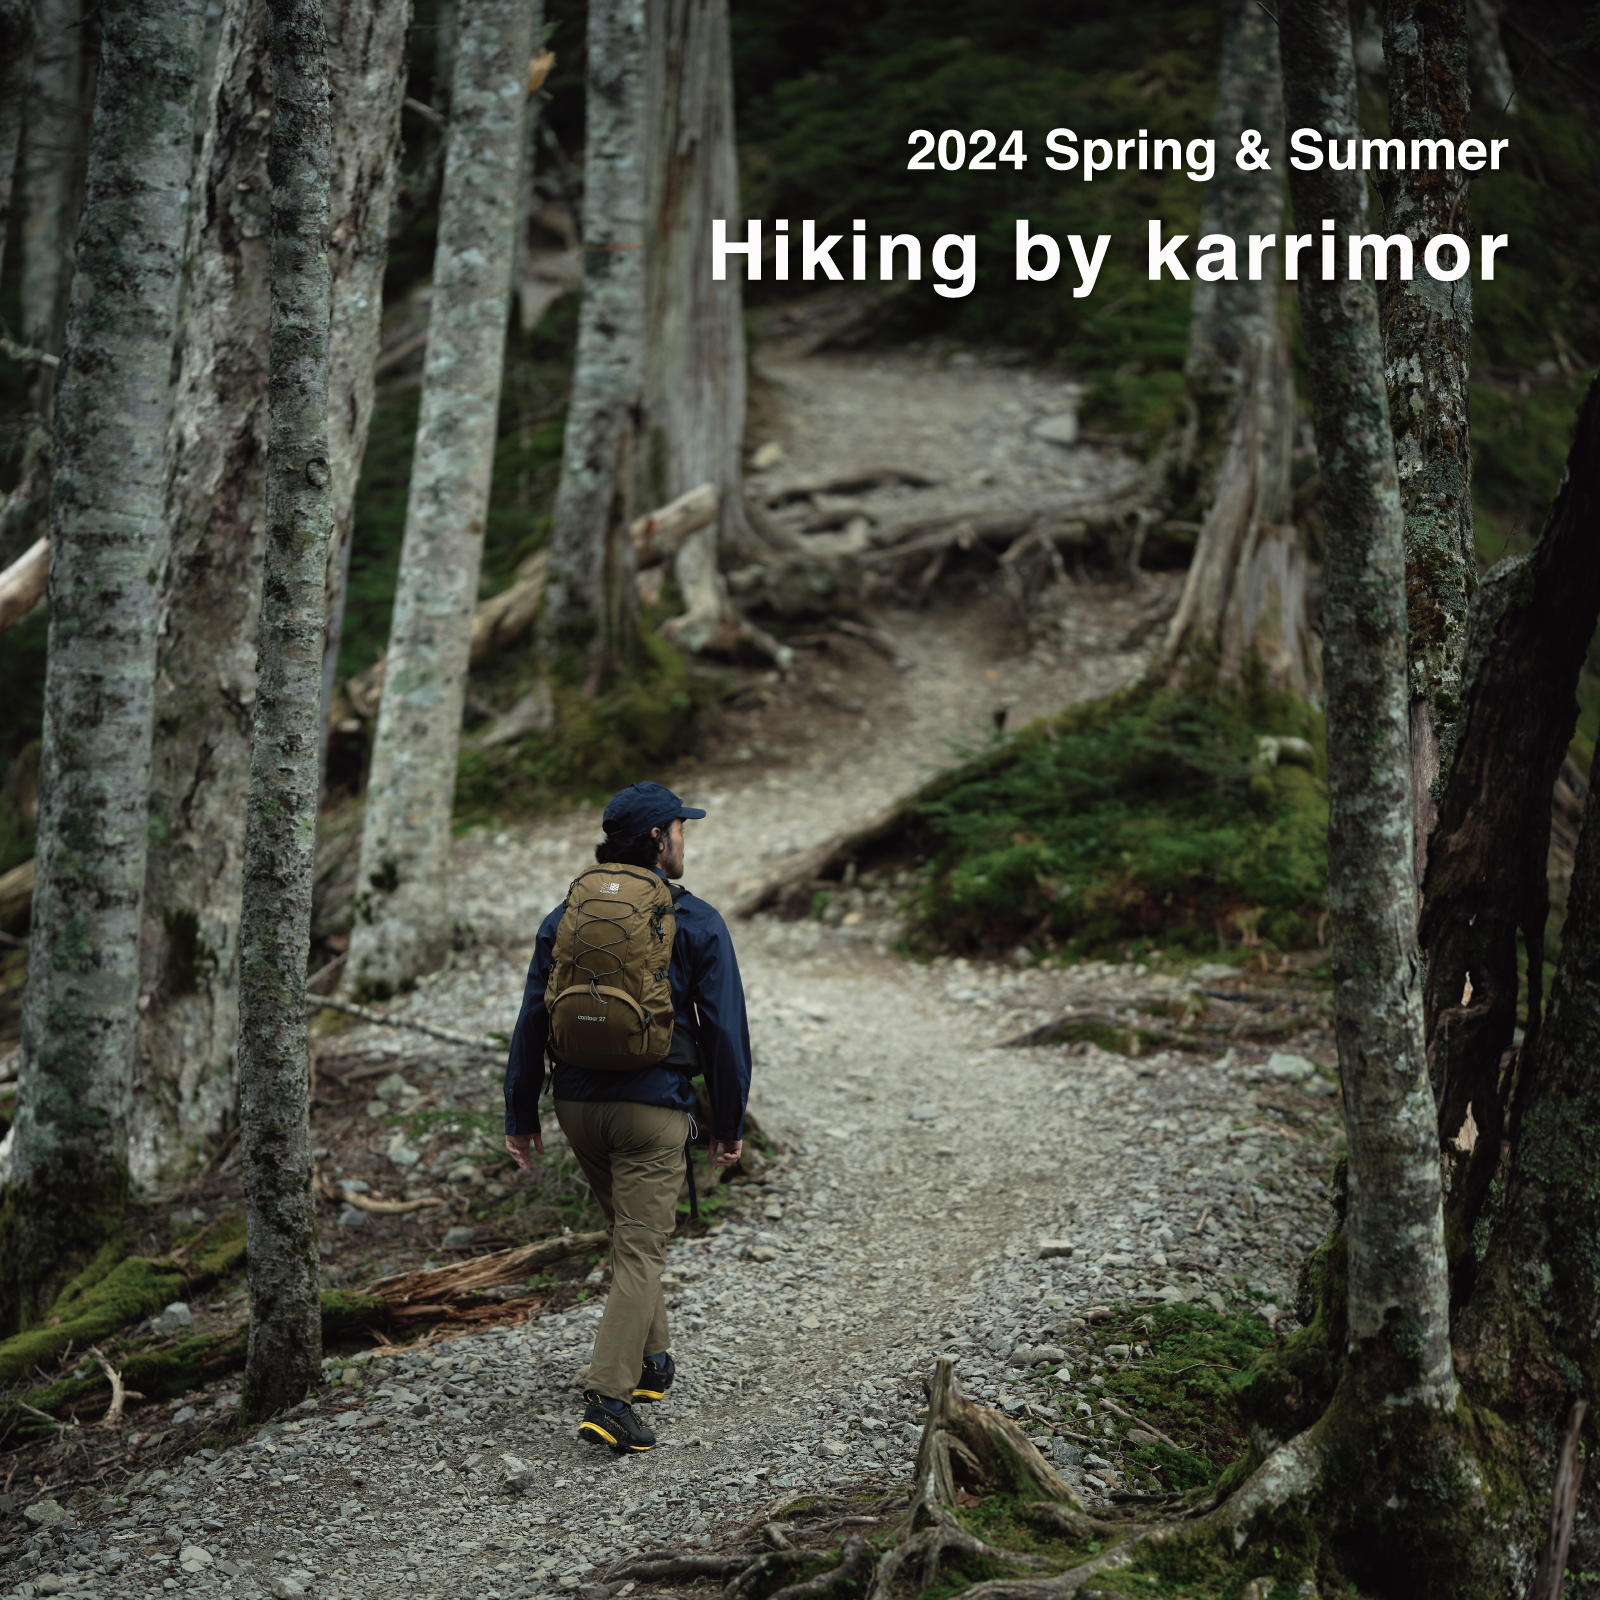 2024 S/S Hiking  by karrimor